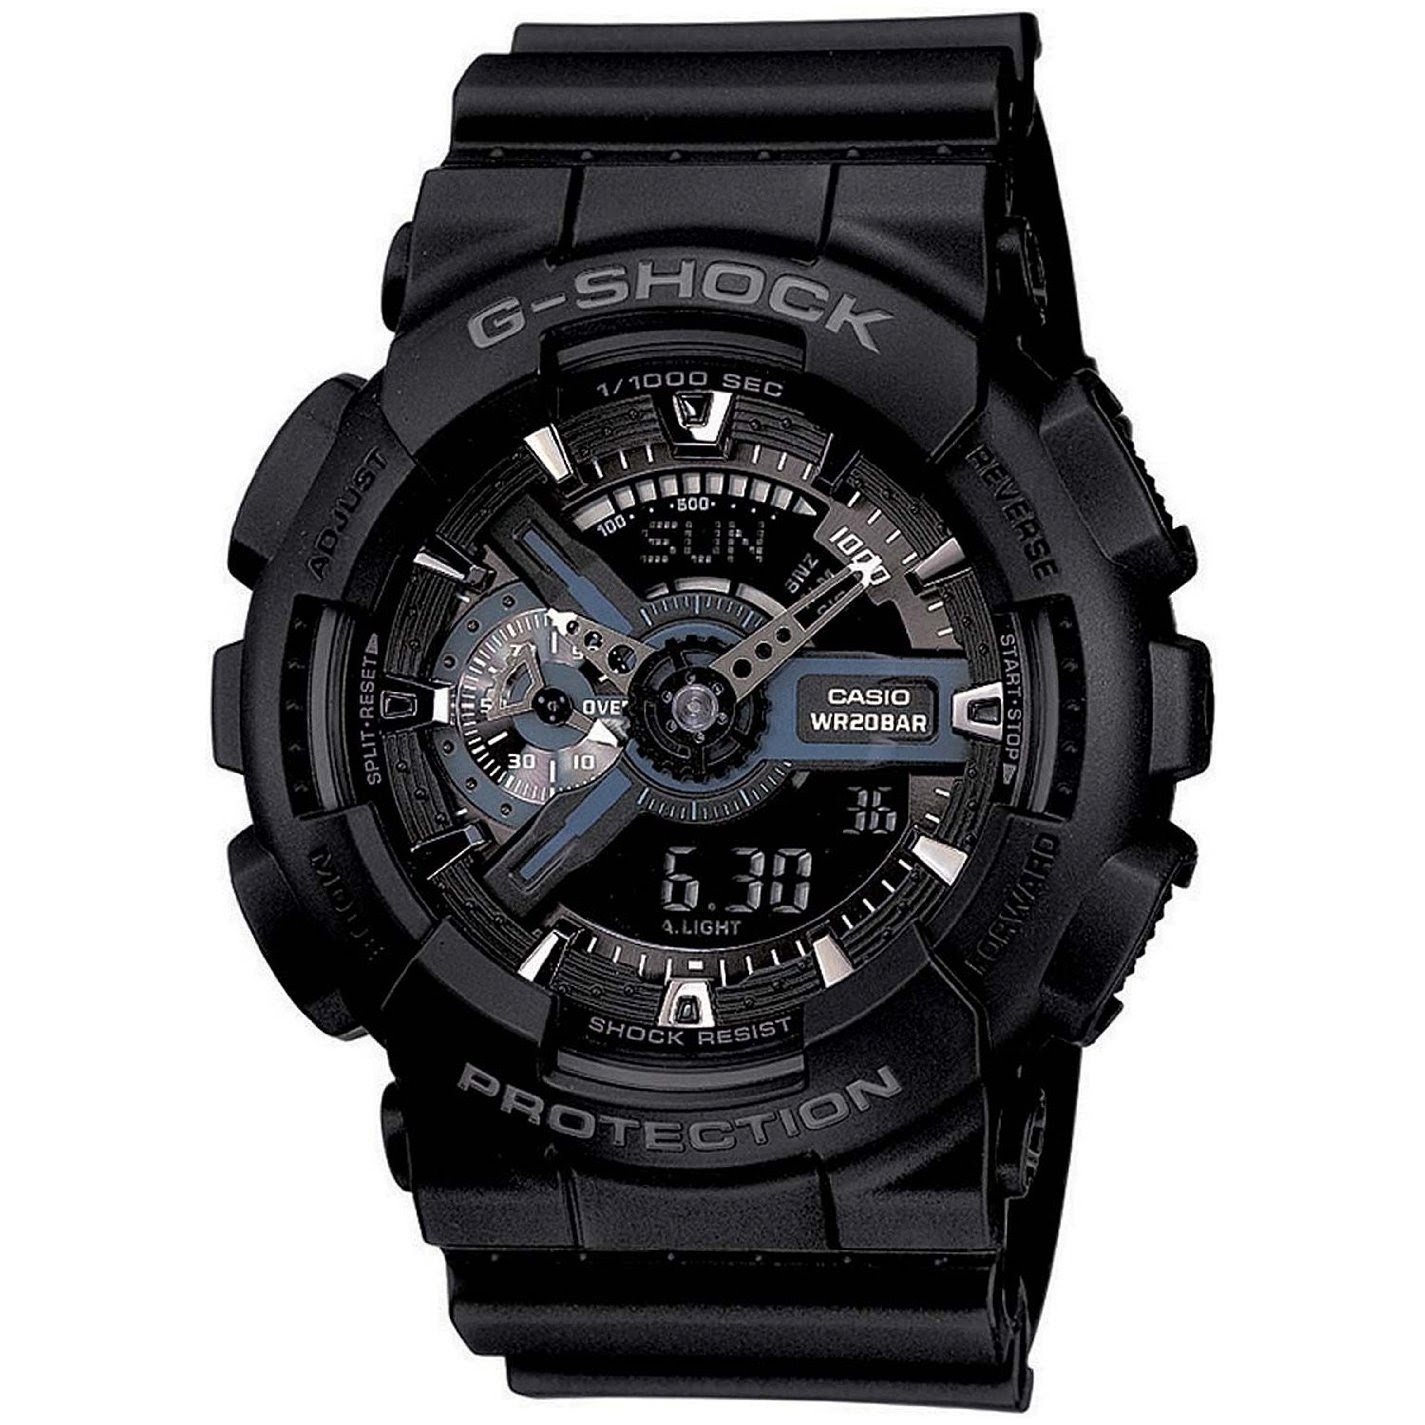 Casio G Shock Watch - World famous watches brands in Albany